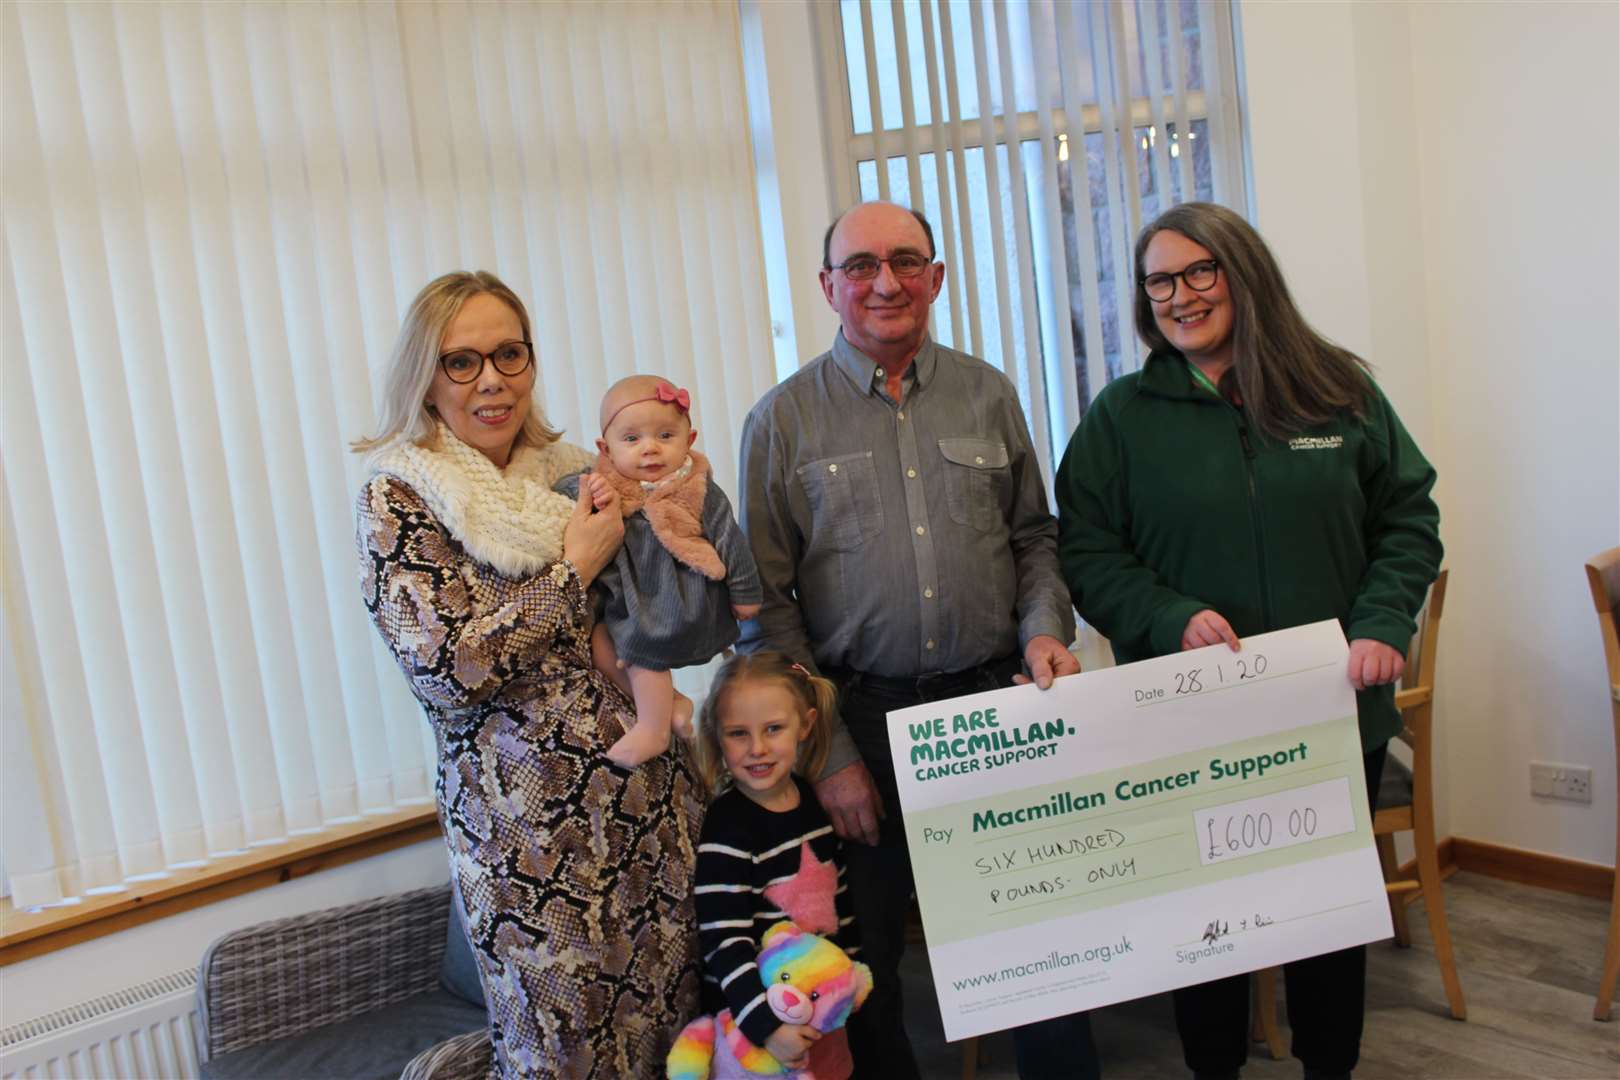 Jayne Pirie, Lucy Massie, Emily Massie and Cliff Pirie presenting the cheque of £600 from their fundraising efforts to Macmillan’s Louise Mackay. Picture: Sean McAngus